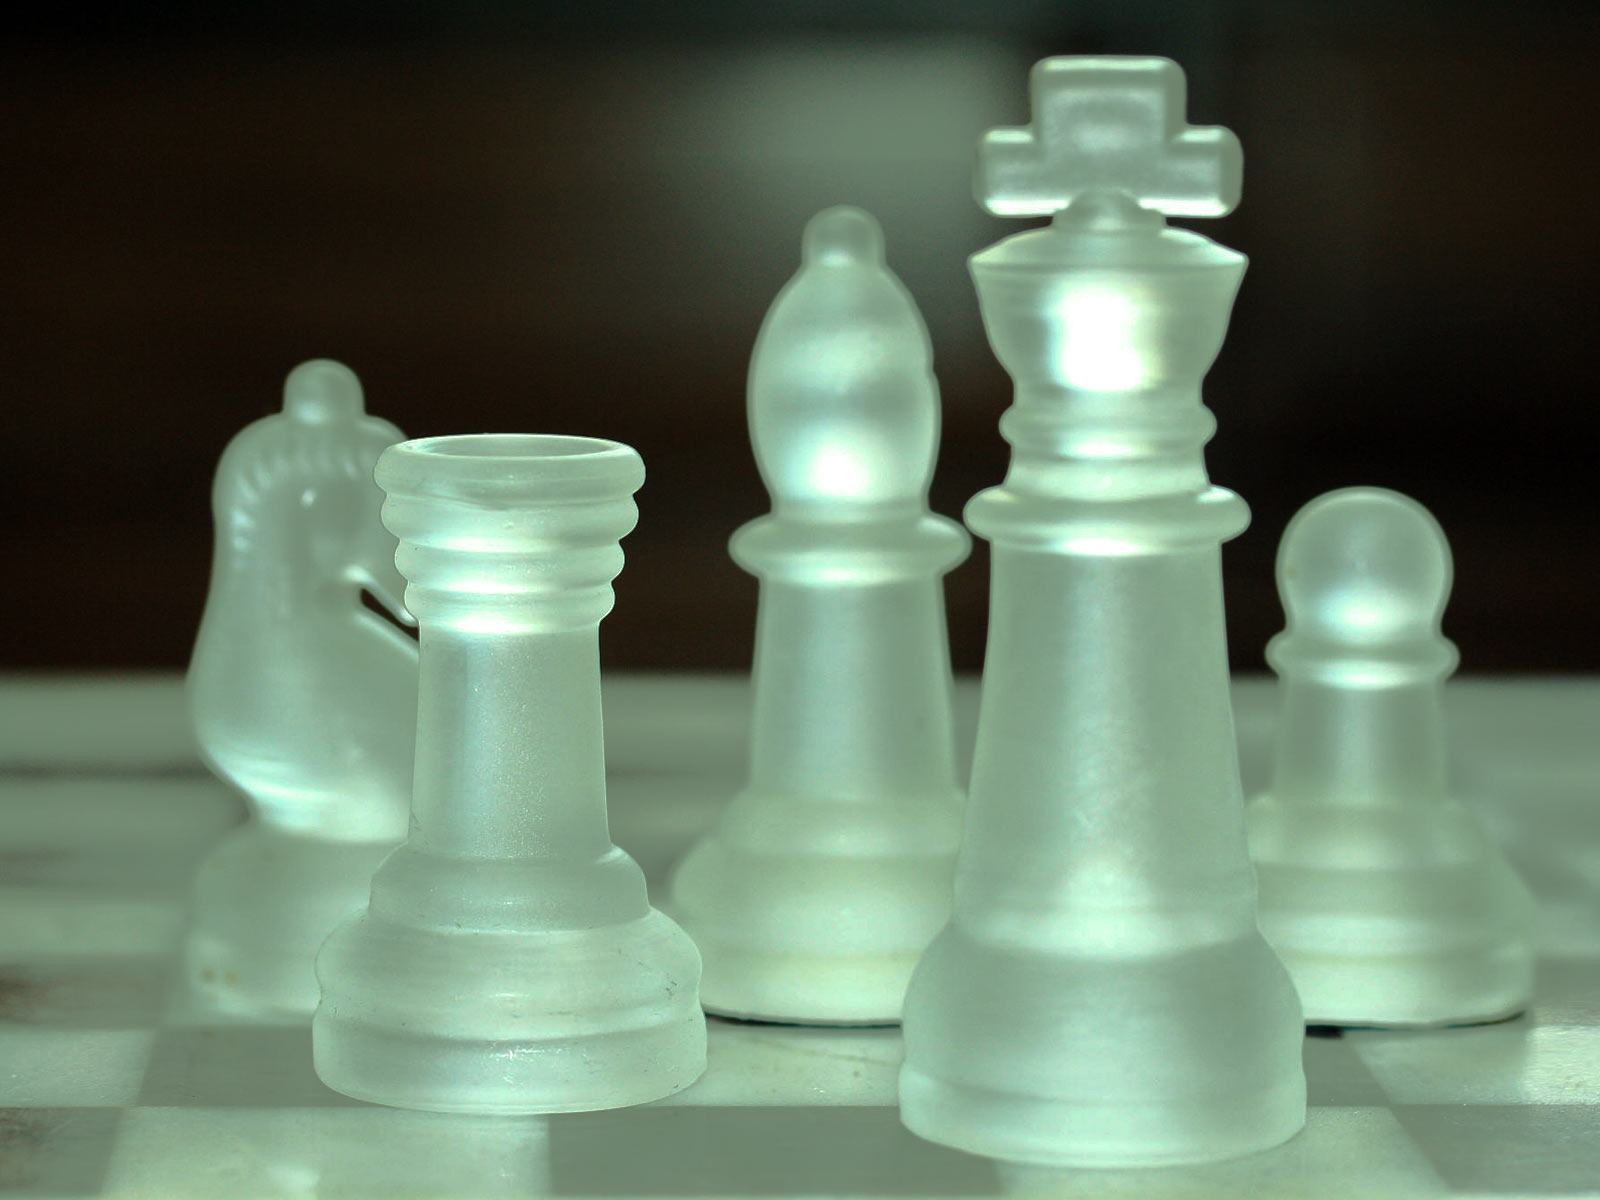 Beautiful Chess From Acrylic HD Wallpaper Picture Photo Free Download